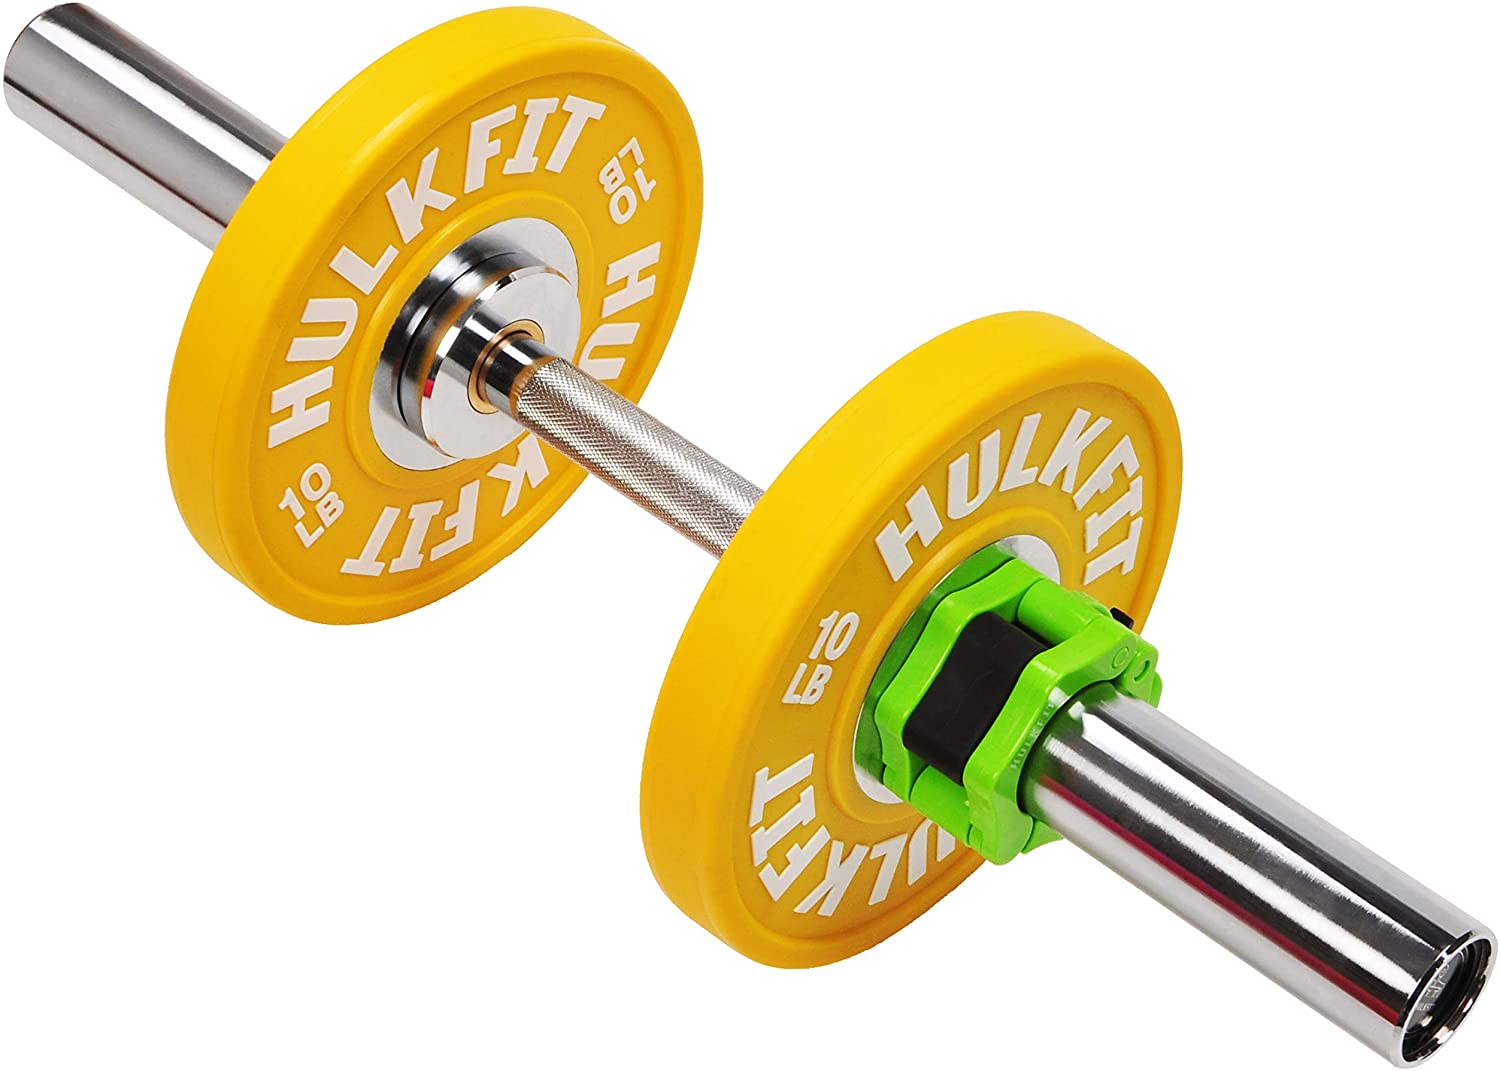 Gym; Home Gym; Garage Gym; Sports; Workout; Strength & Conditioning; Strength Training; Powerlifting; Olympic Weightlifting; Strongman; Weight Plates; Bumper Plates; Dumbbells